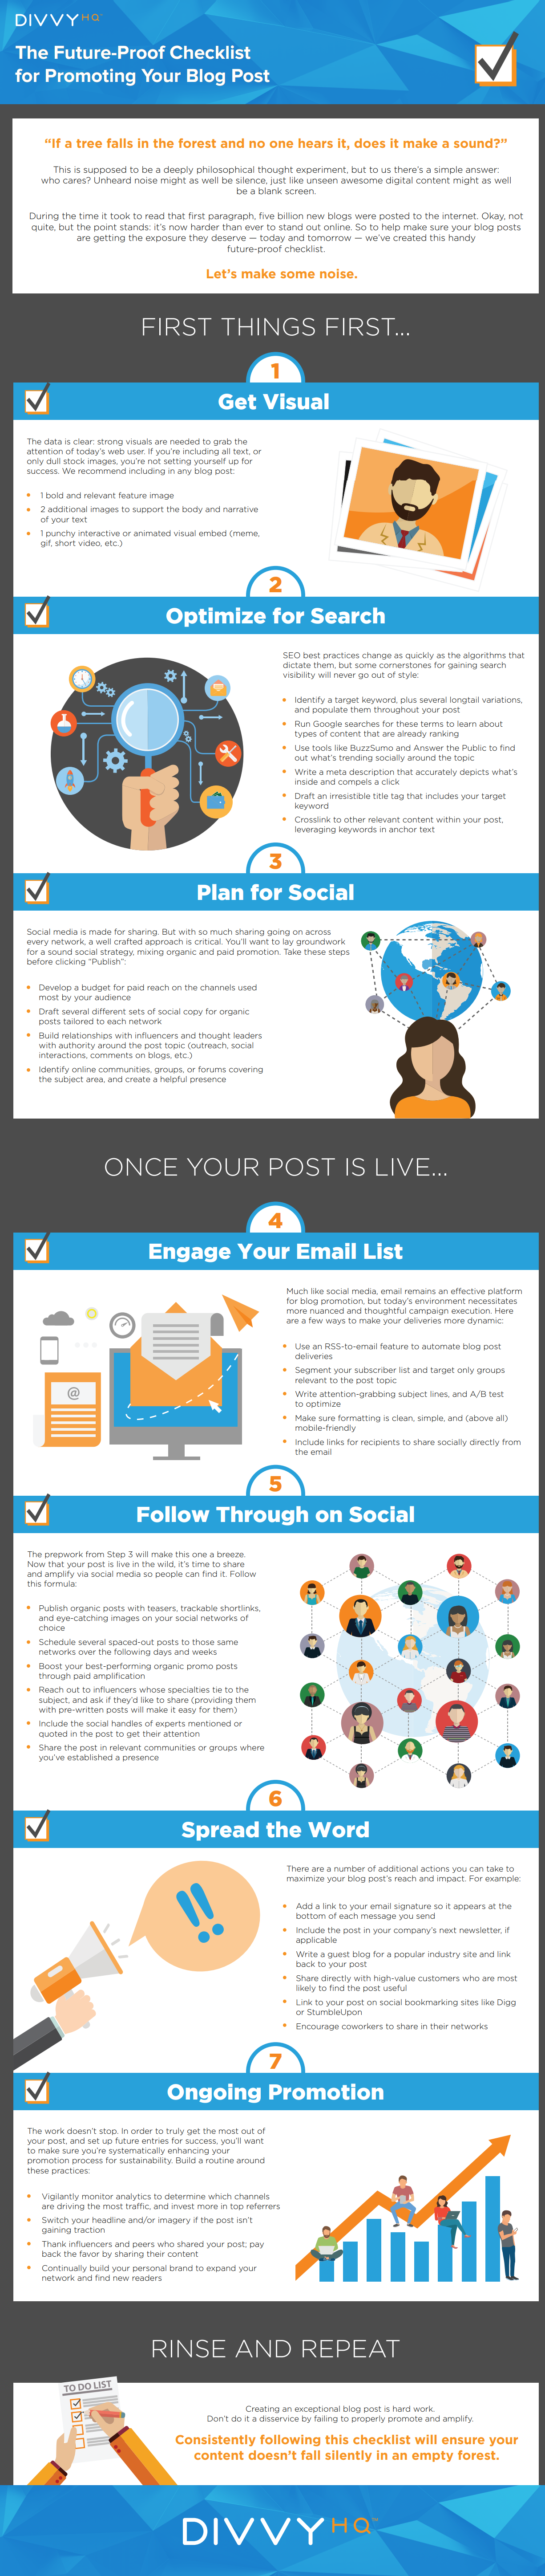 Infographic: A 7-Step Checklist For Promoting Your Content